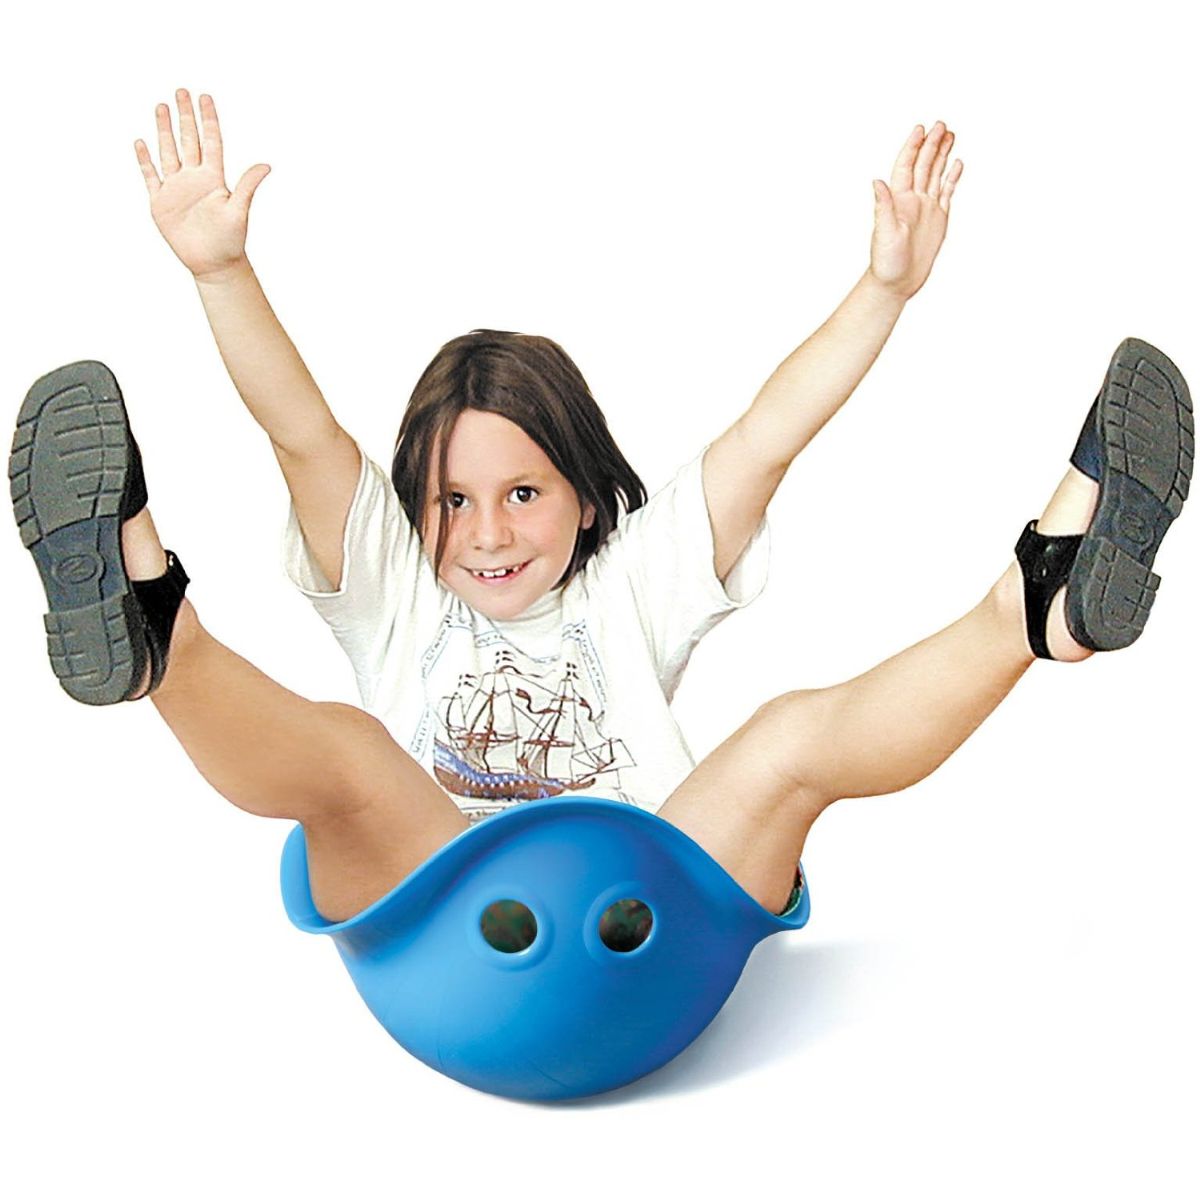 Bilibo Play Shell for Stimulating Gross Motor Functions